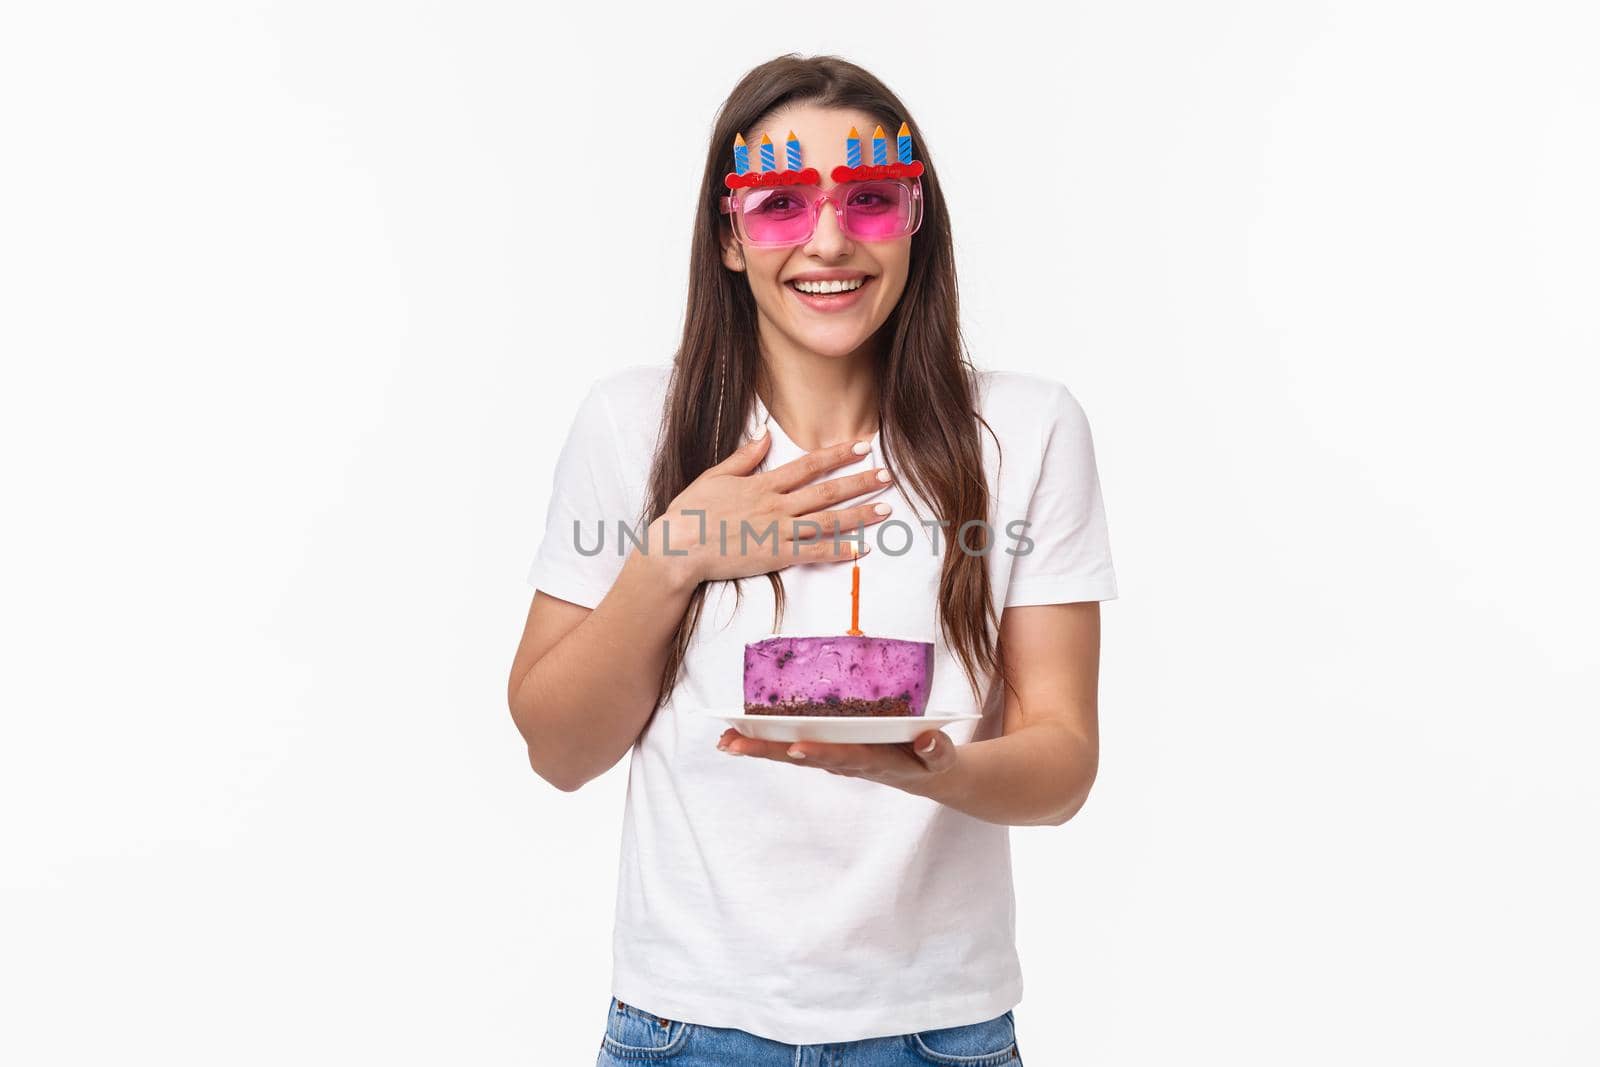 Entertainment, fun and holidays concept. Thankful surprised cute girl celebrating birthday, receive piece cake with lit candle, making b-day wish, wear funny glasses, smiling and laughing happy.